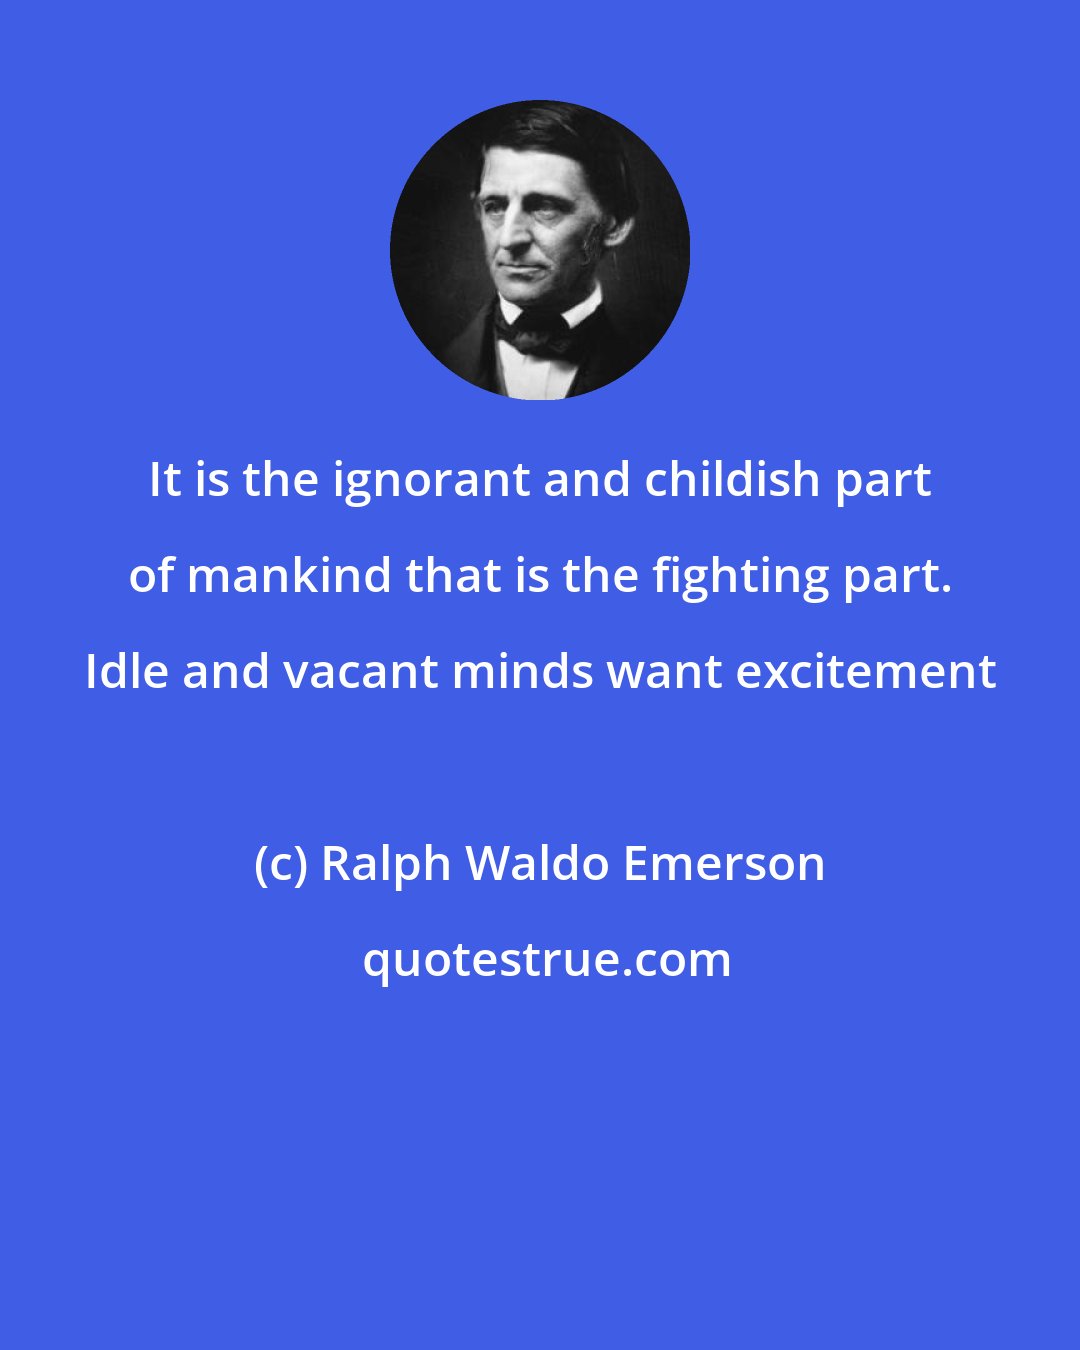 Ralph Waldo Emerson: It is the ignorant and childish part of mankind that is the fighting part. Idle and vacant minds want excitement